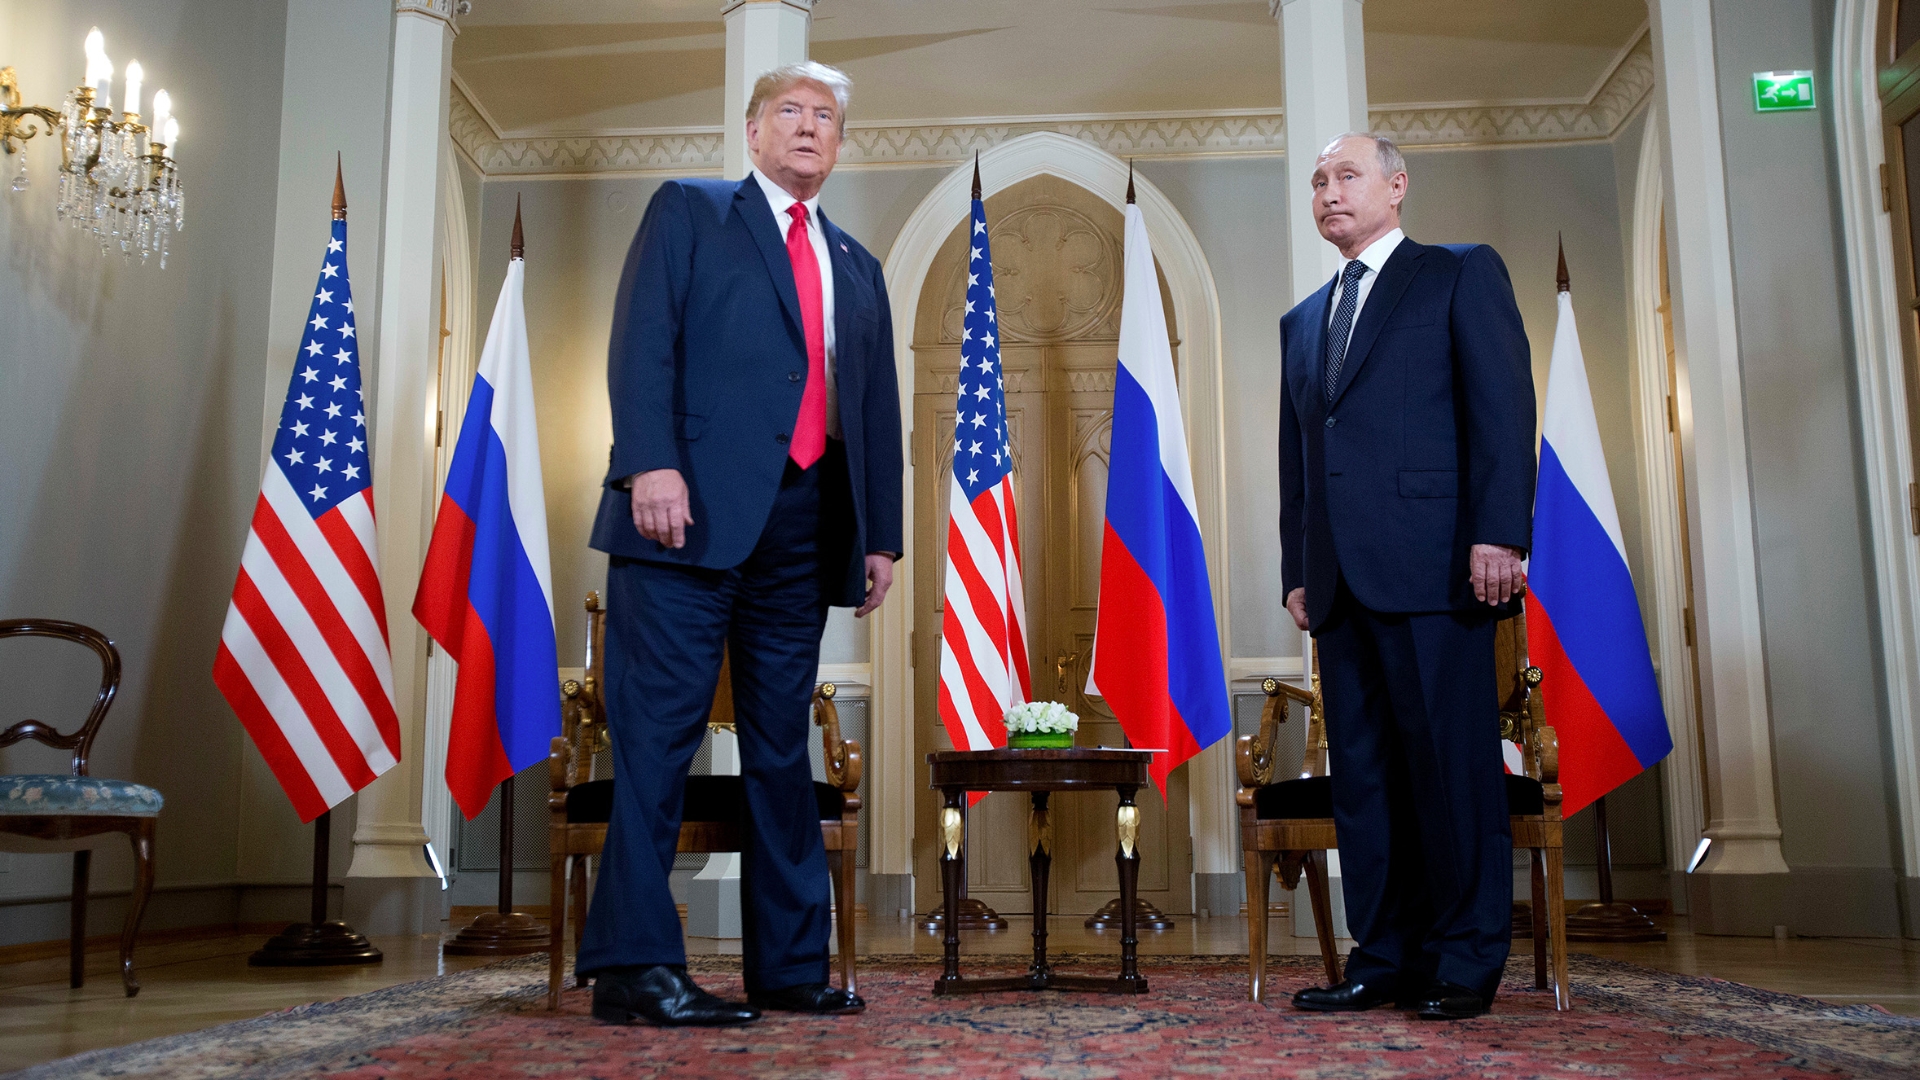 Russian　GOP　Washington　The　Daily　Post　Trump　202:　senators　the　party　downplaying　interference　shows　co-opted　how　has　The